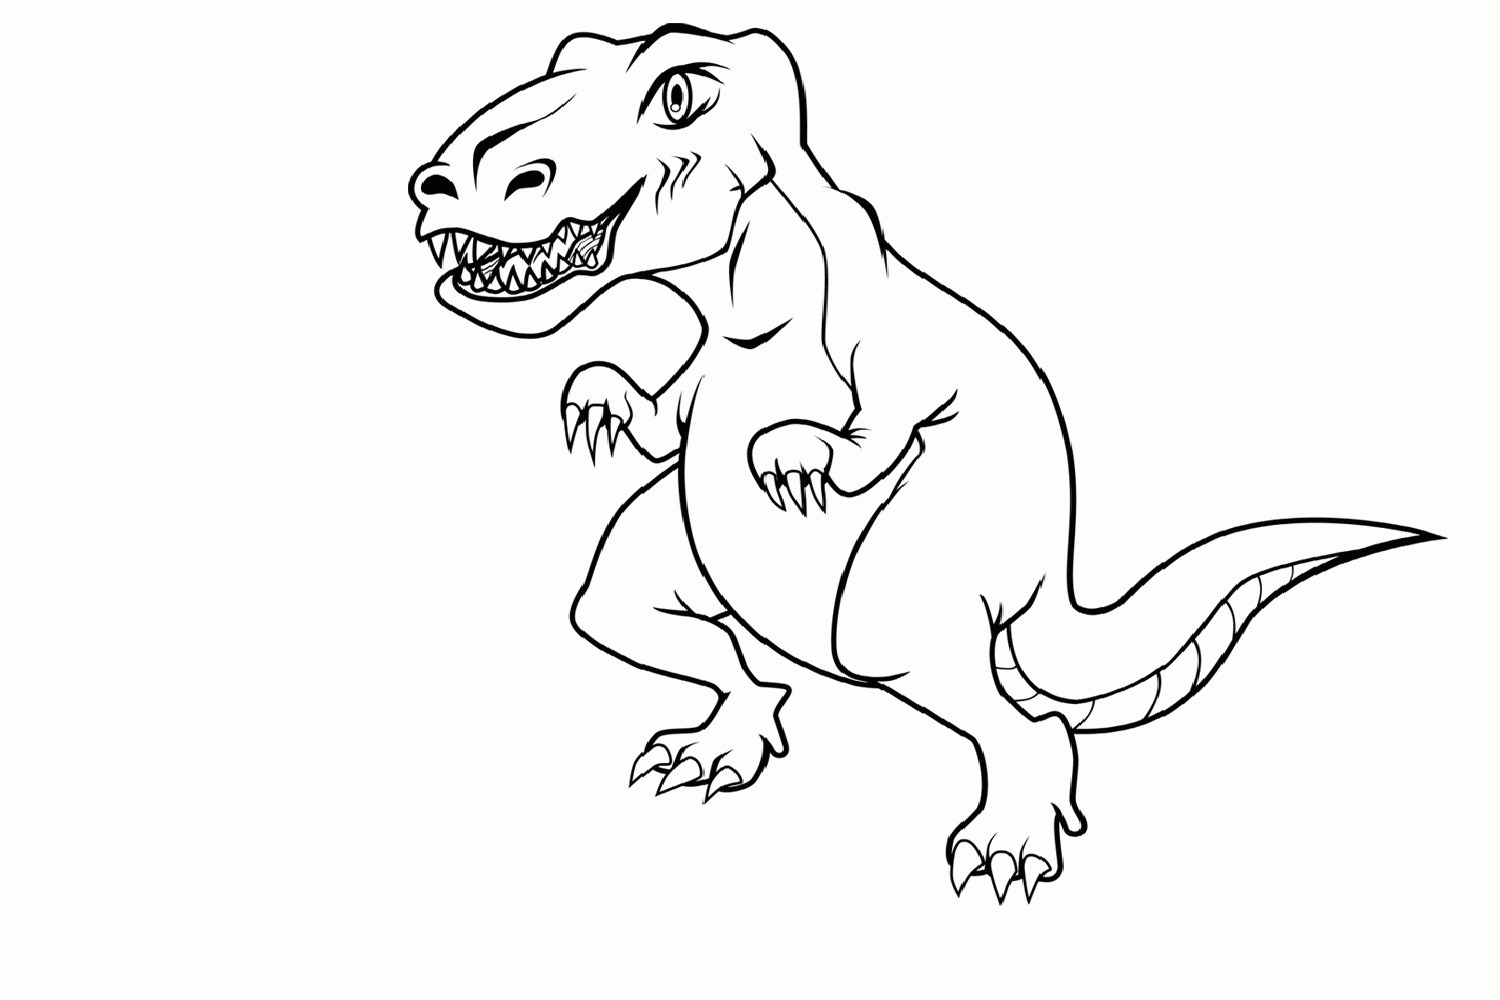 Free Dinosaur Coloring Pages For Preschoolers Download Free Dinosaur